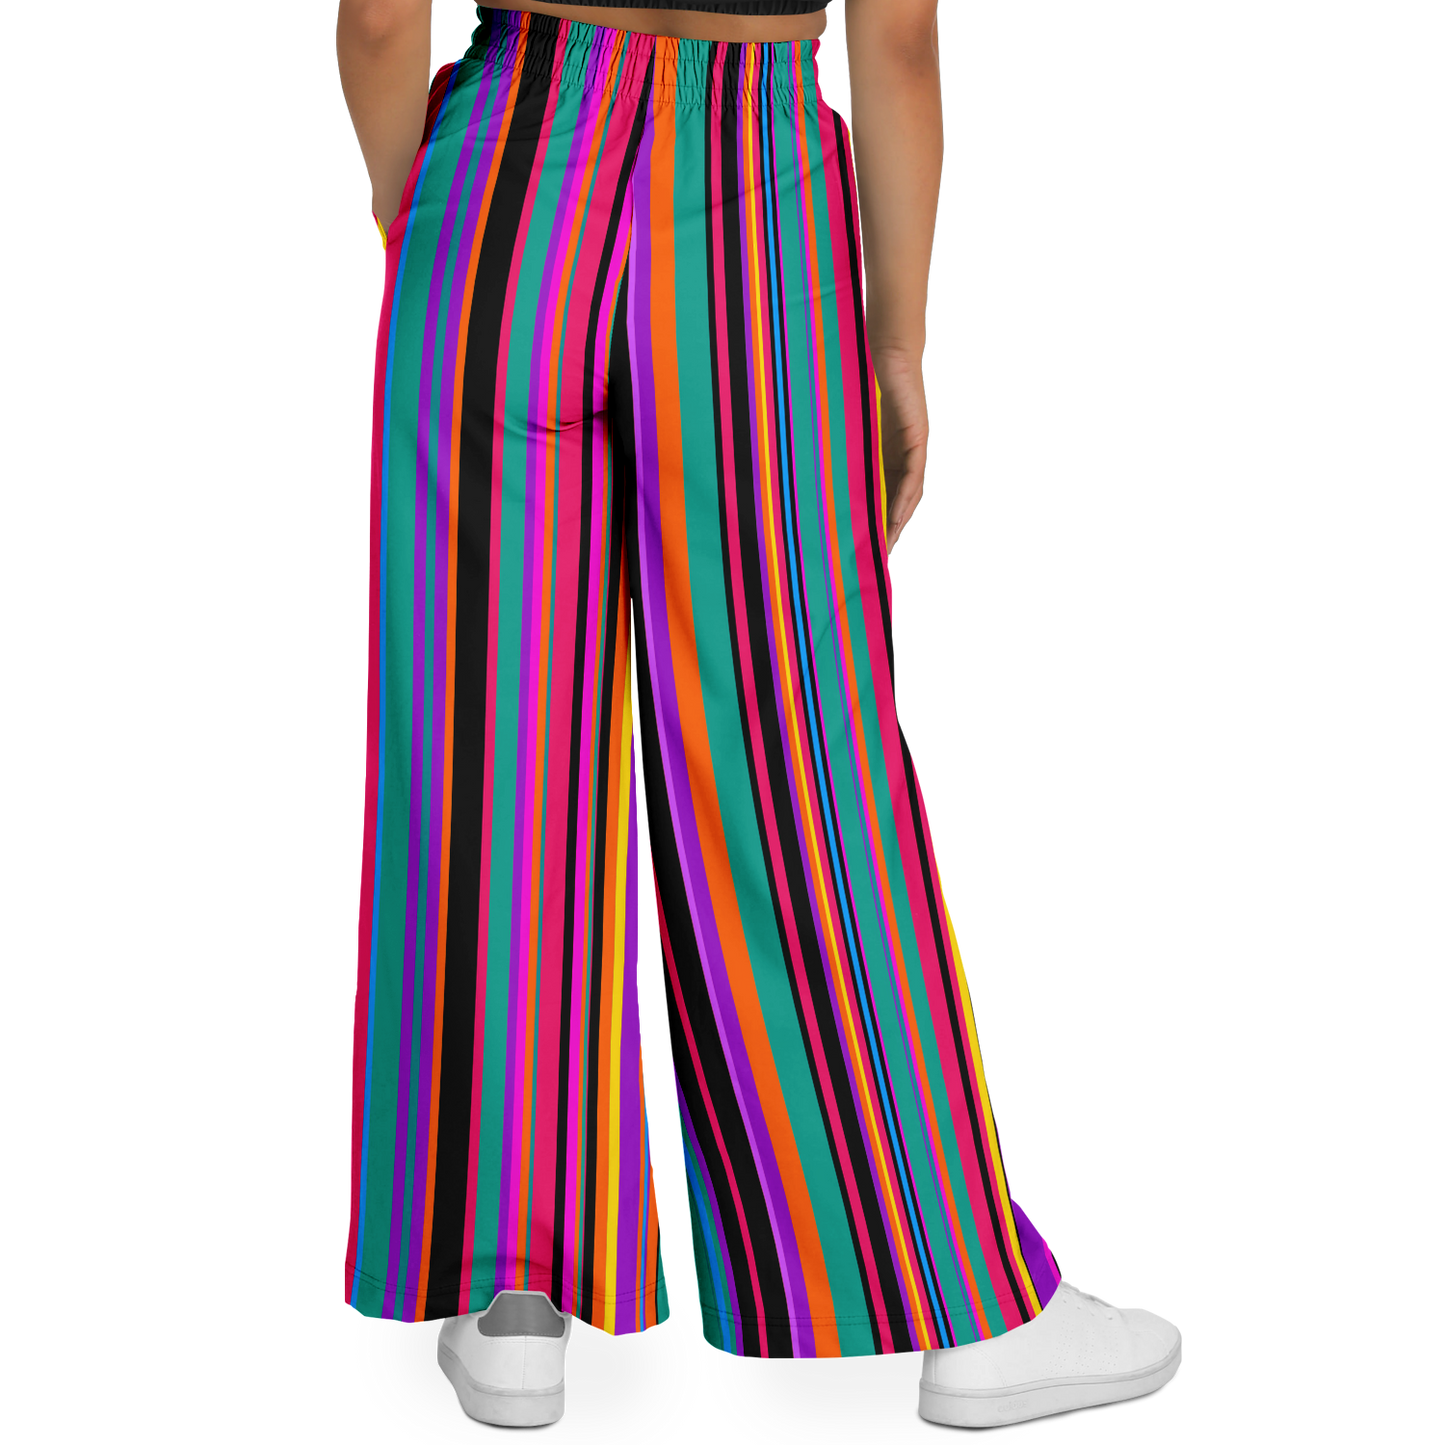 colourful flares - face painter pants - balloon dog apparel